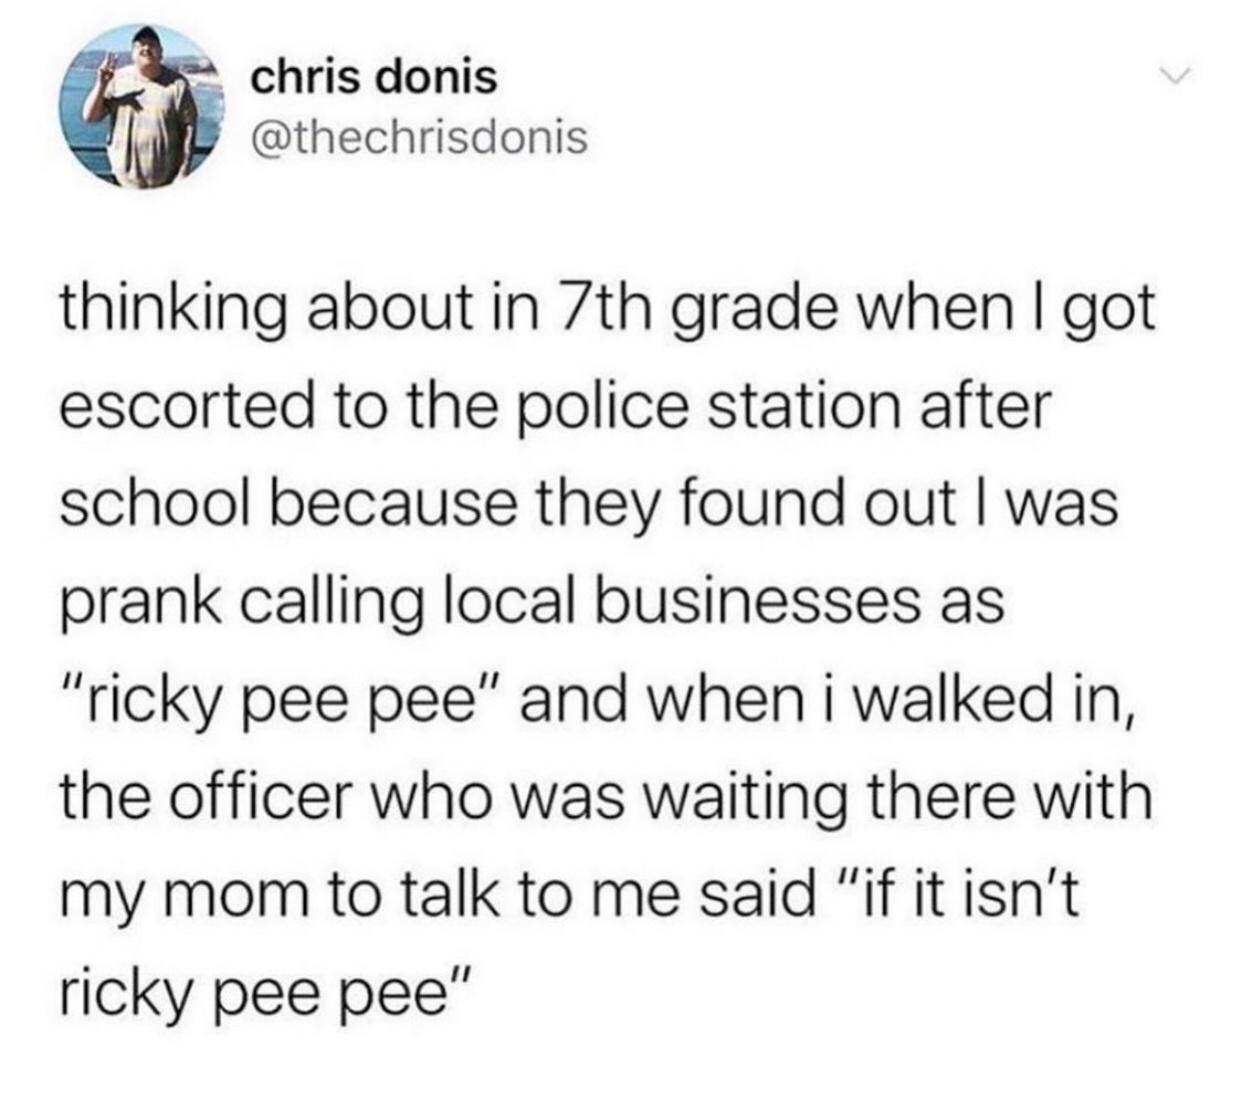 funny bible tweet - chris donis thinking about in 7th grade when I got escorted to the police station after school because they found out I was prank calling local businesses as "ricky pee pee" and when i walked in, the officer who was waiting there with 